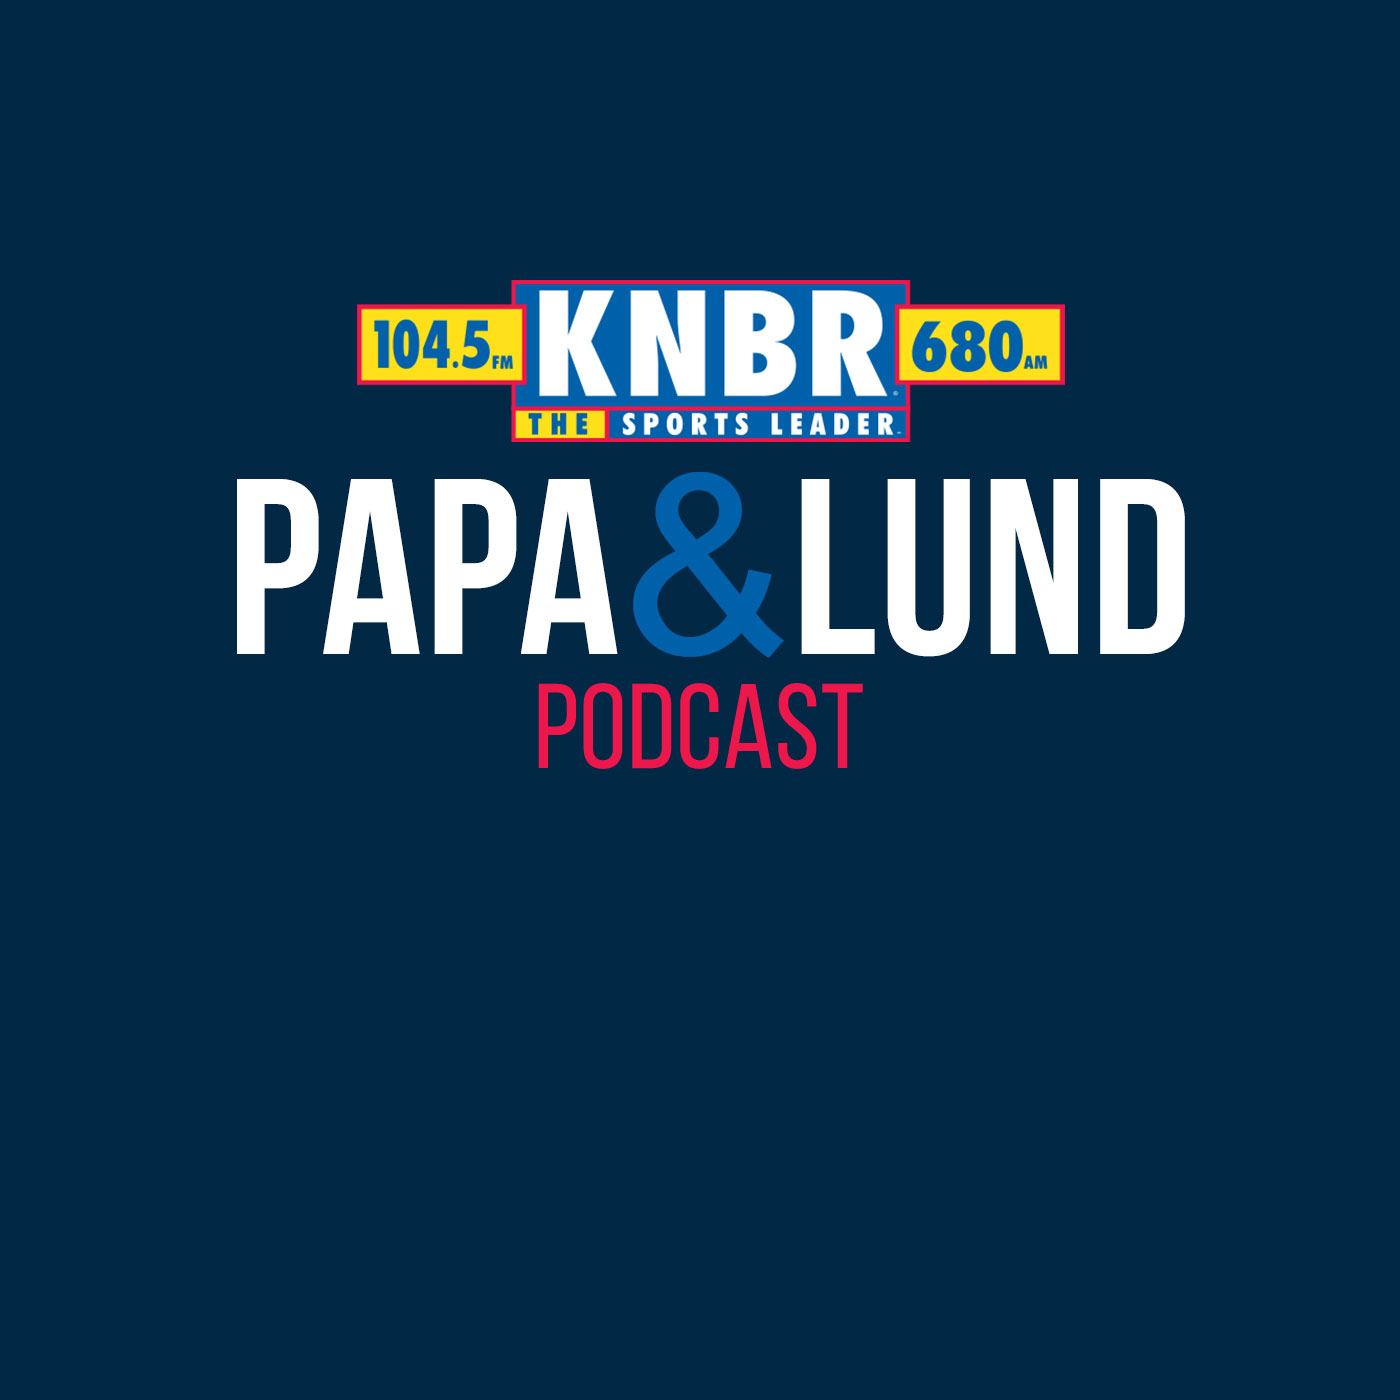 11-9 Dennis Brown joins Papa & Lund and remembers his Superbowl 29 victory against the Chargers as the 49ers plan to get rolling out of the Bye Week